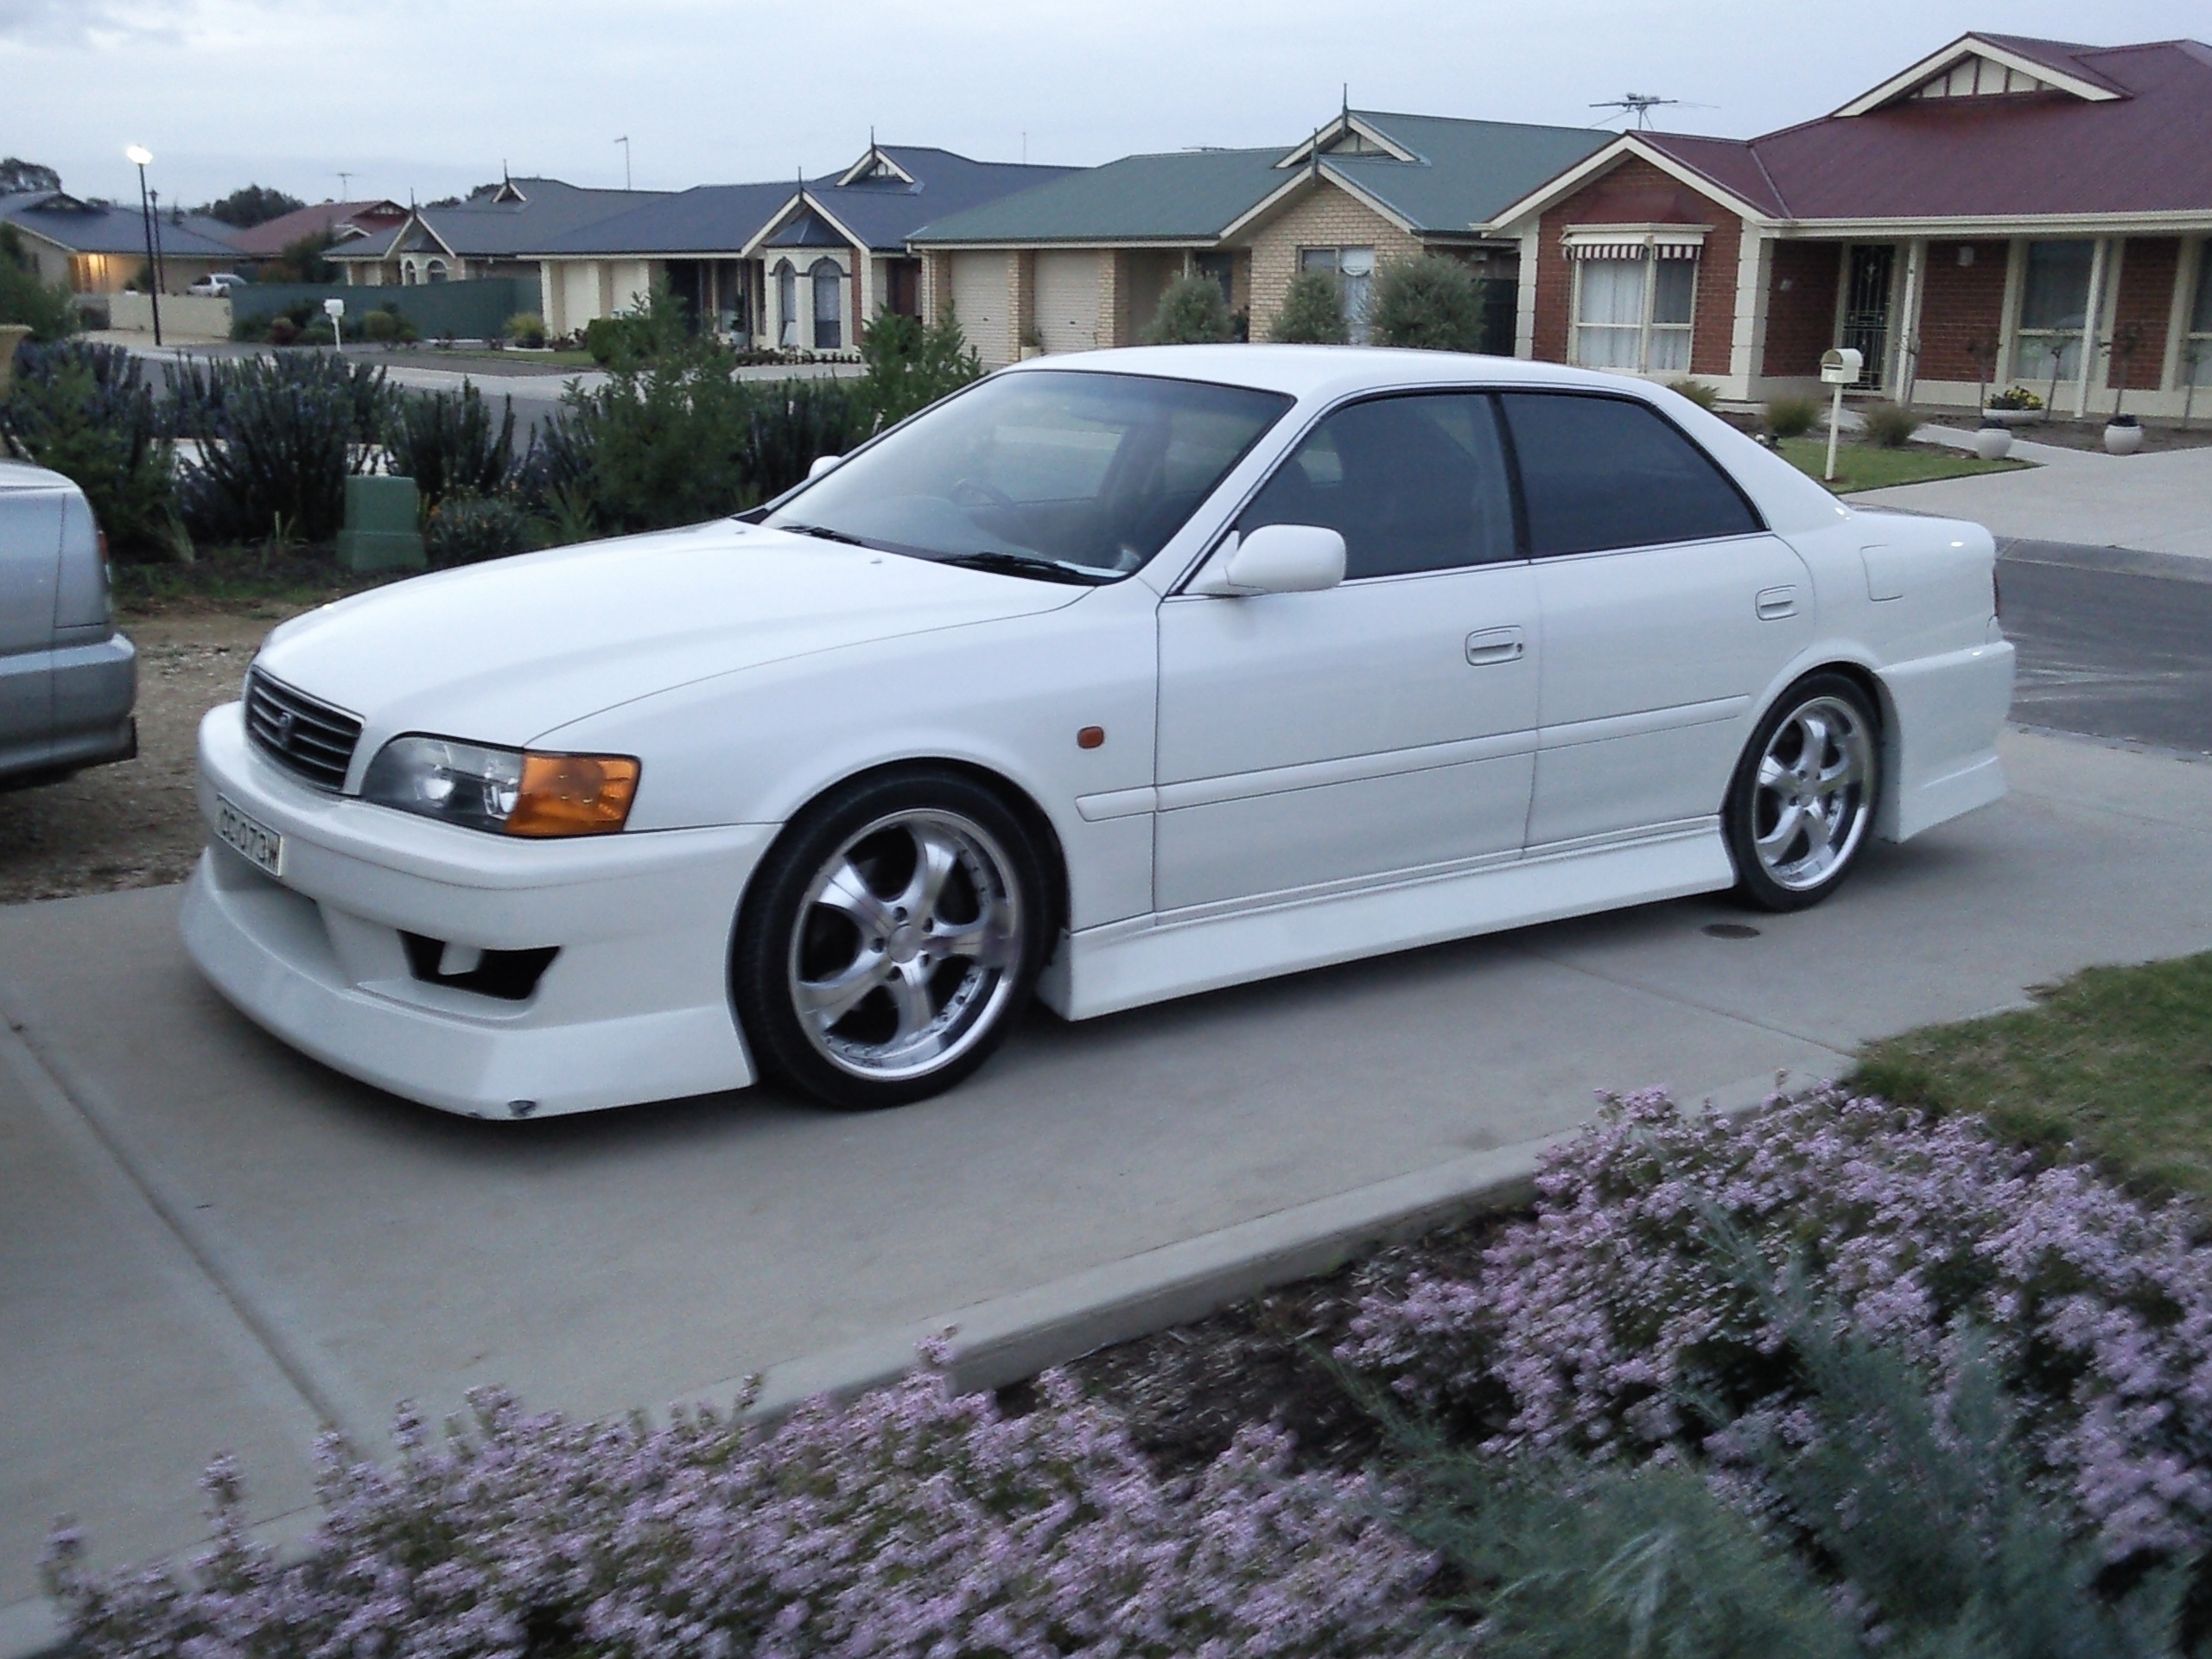 Jzx100 Chaser Sa - For Sale (Private Whole cars only) - SAU Community